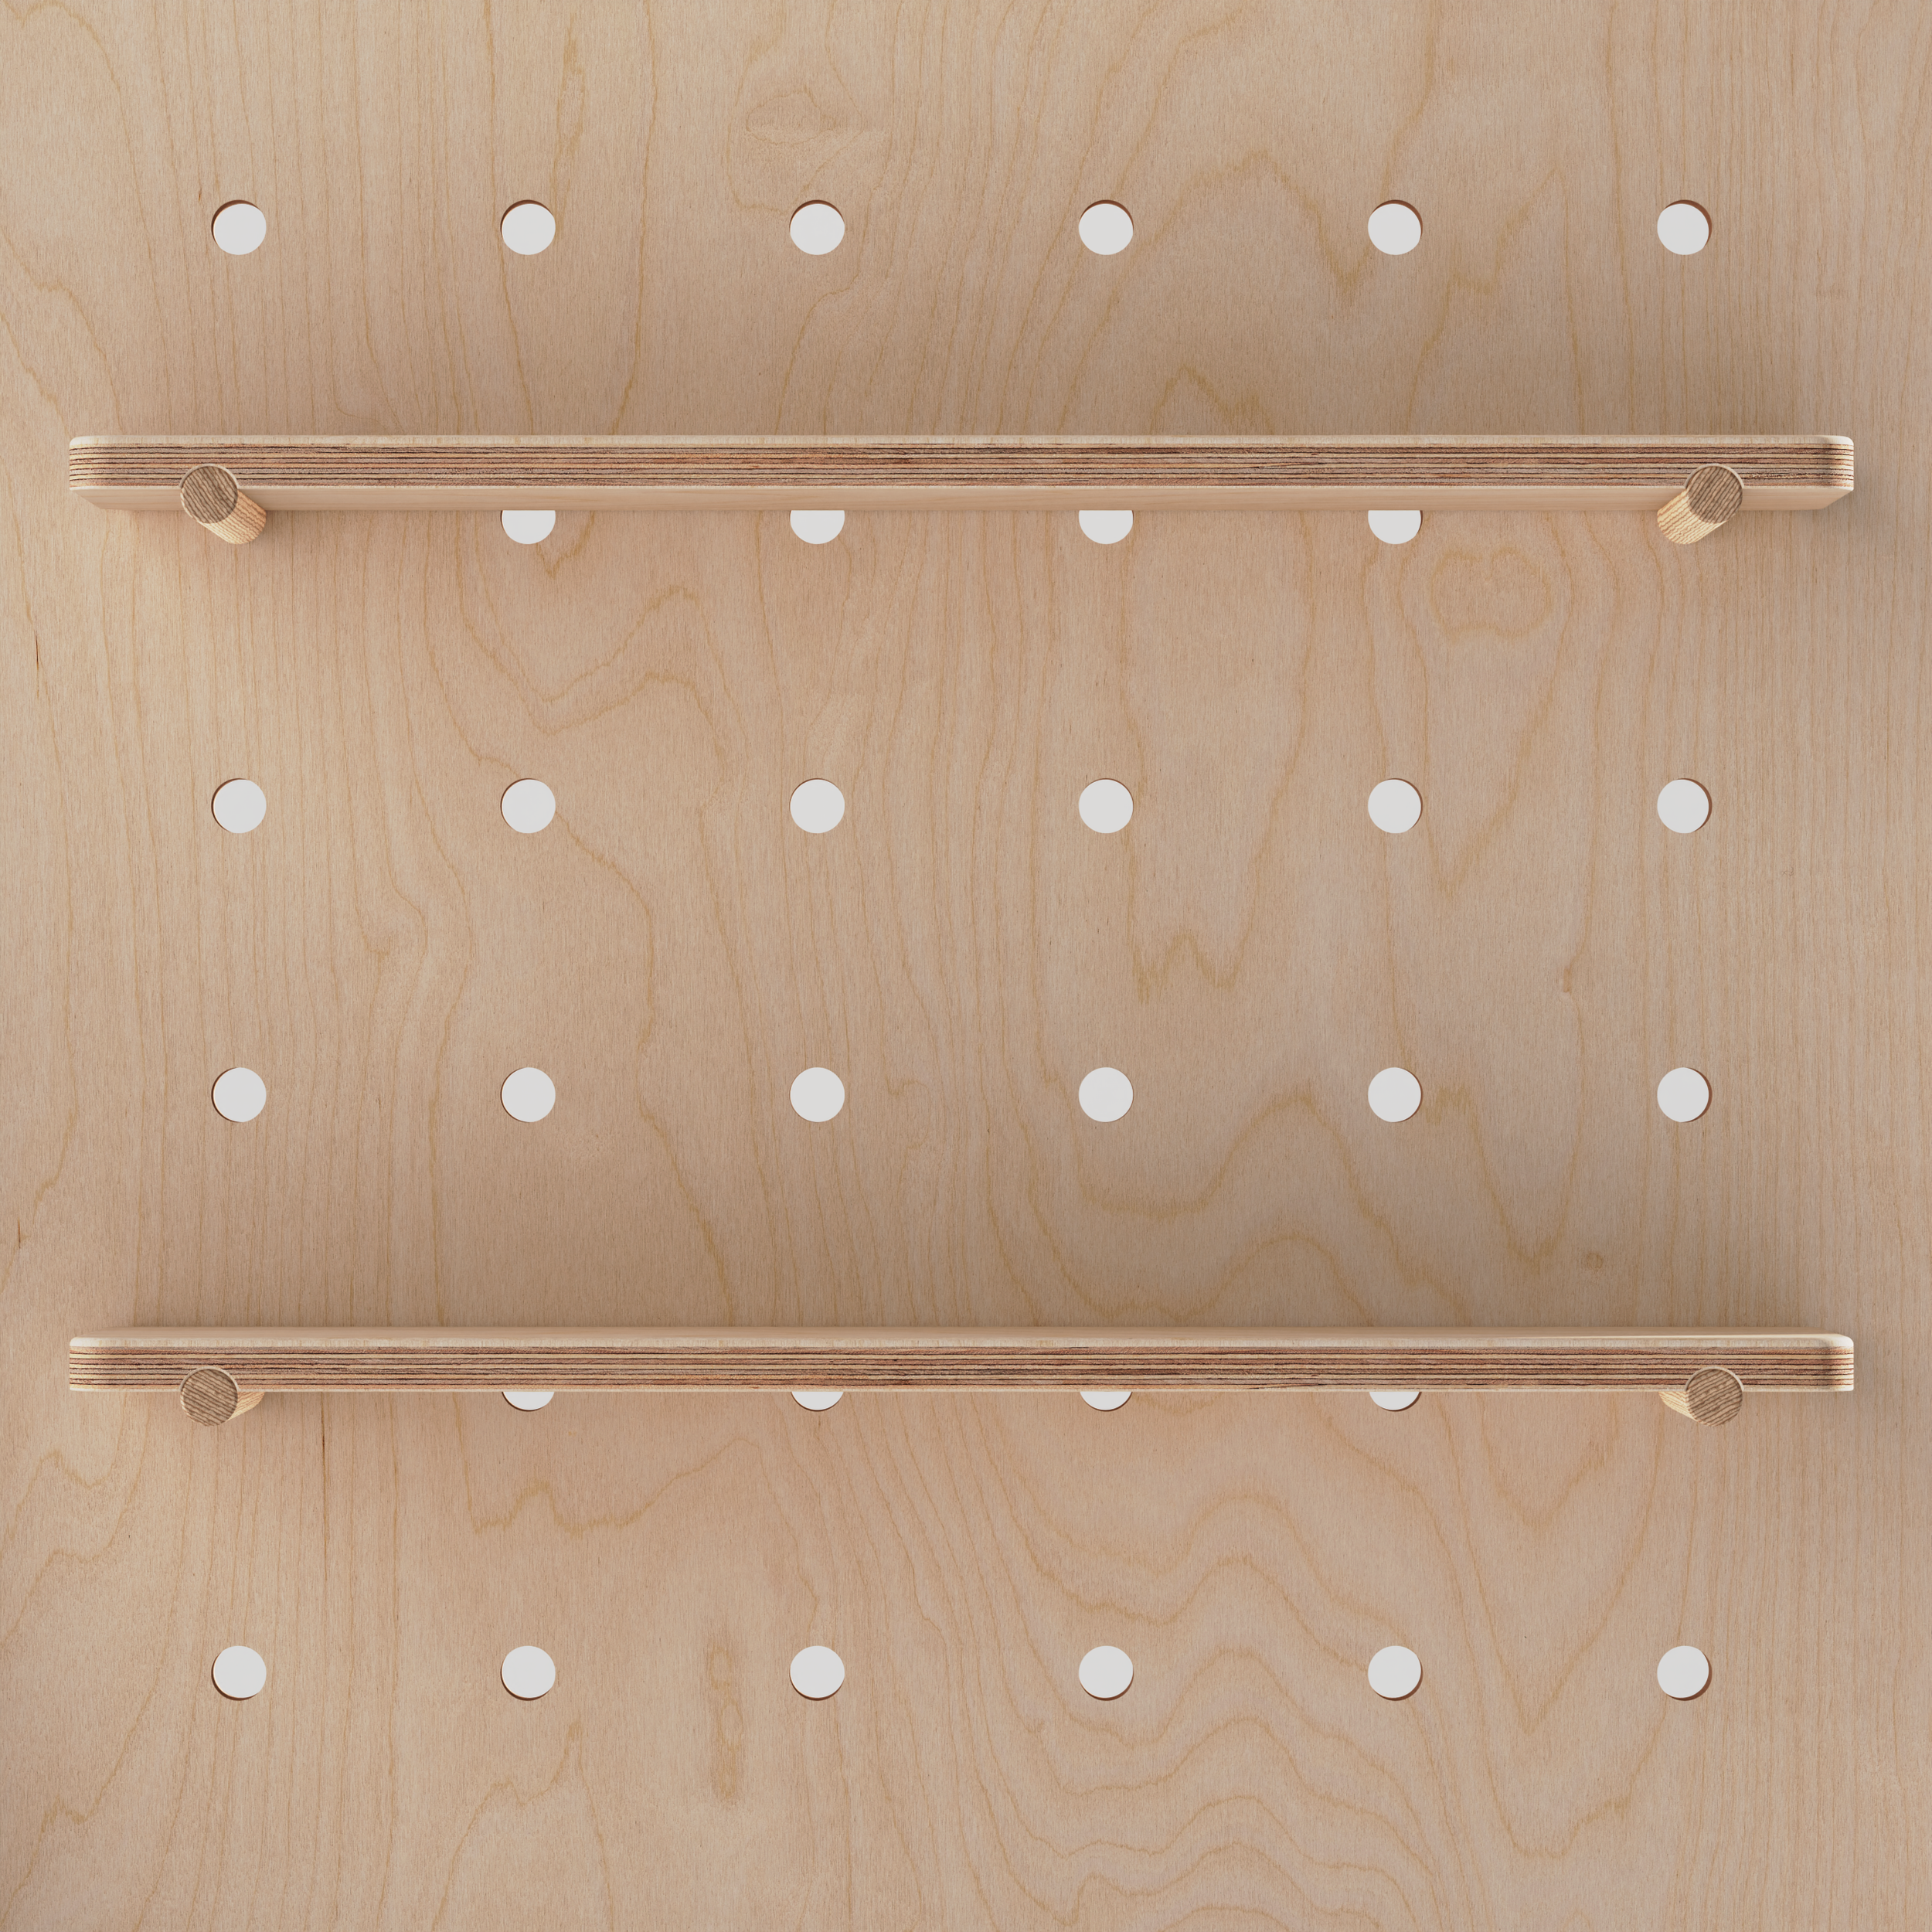 Pegboard Standing C.png